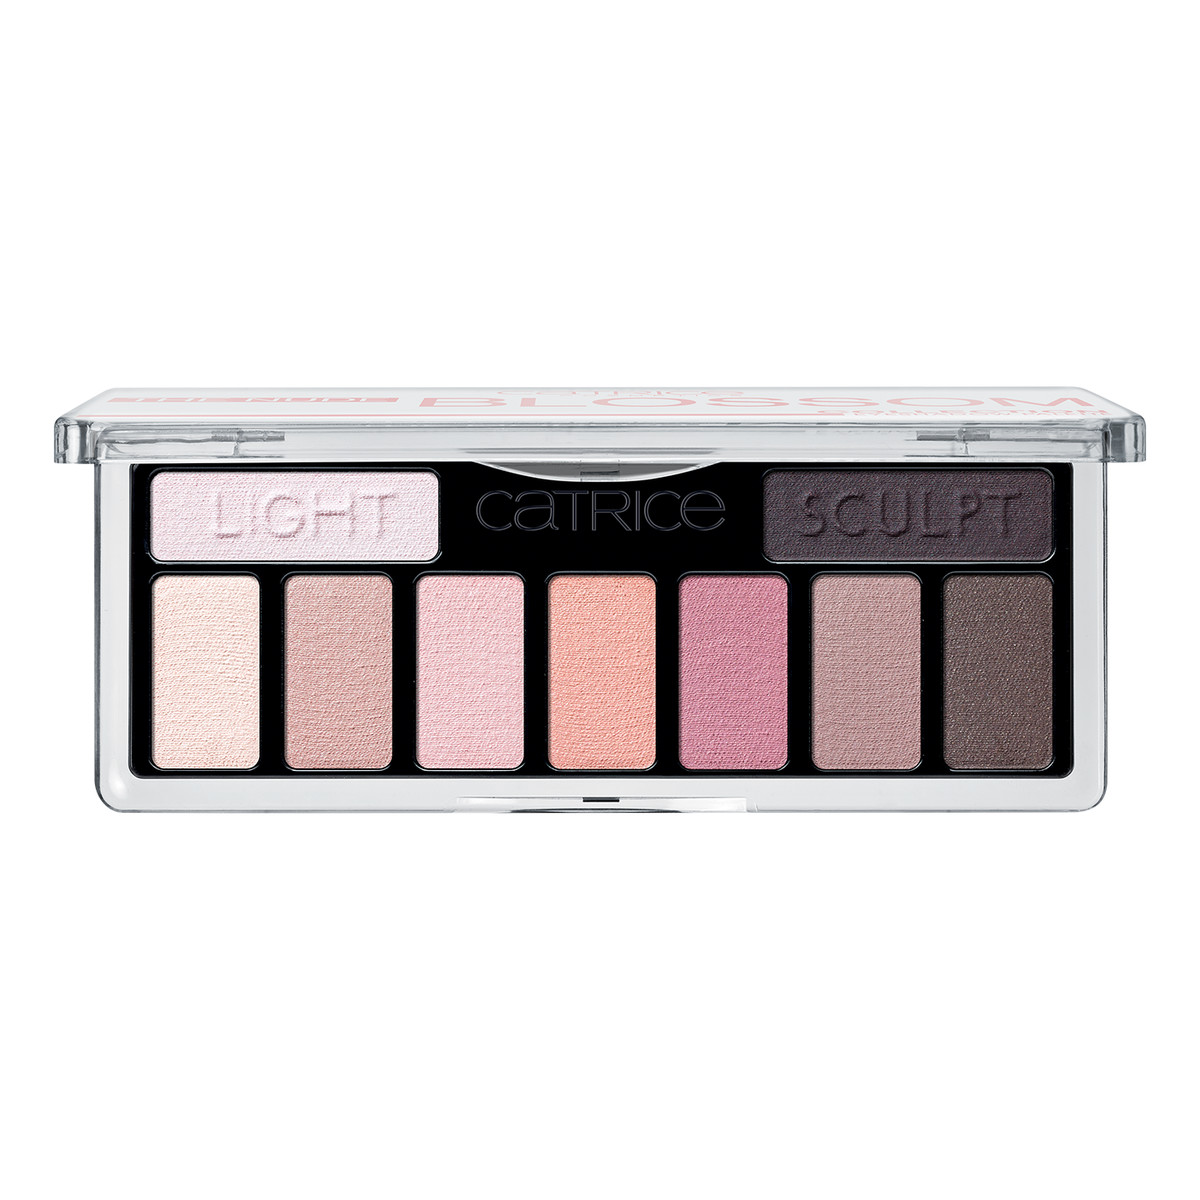 Catrice The Nude Blossom Collection Eyeshadow Palette Paletka Pudrowych Cieni 10g